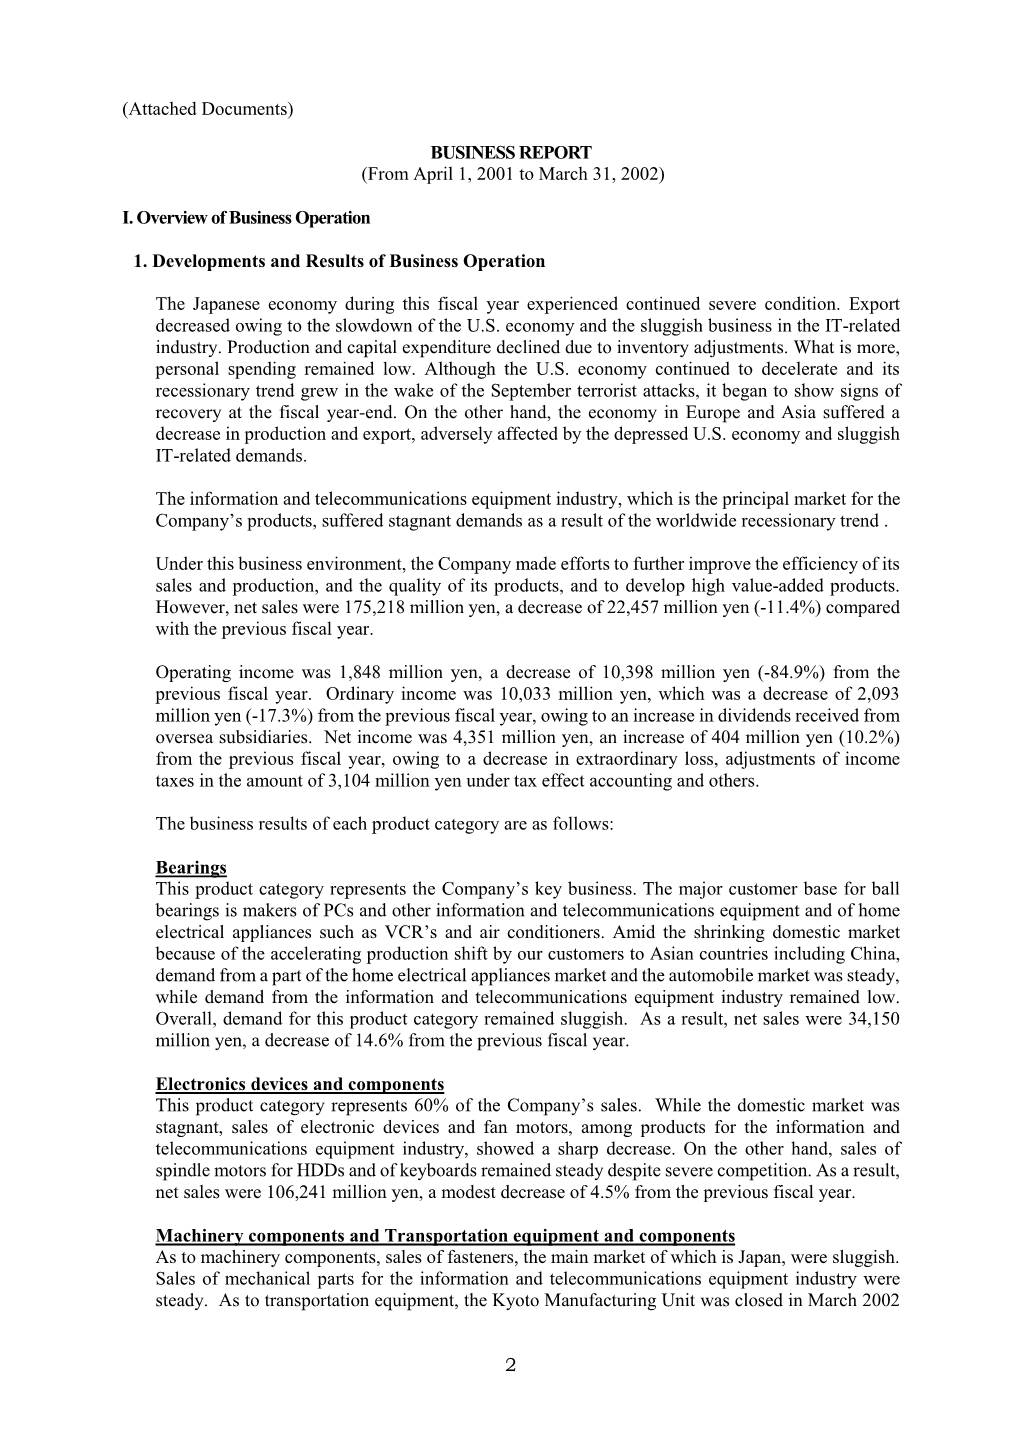 2 (Attached Documents) BUSINESS REPORT (From April 1, 2001 To